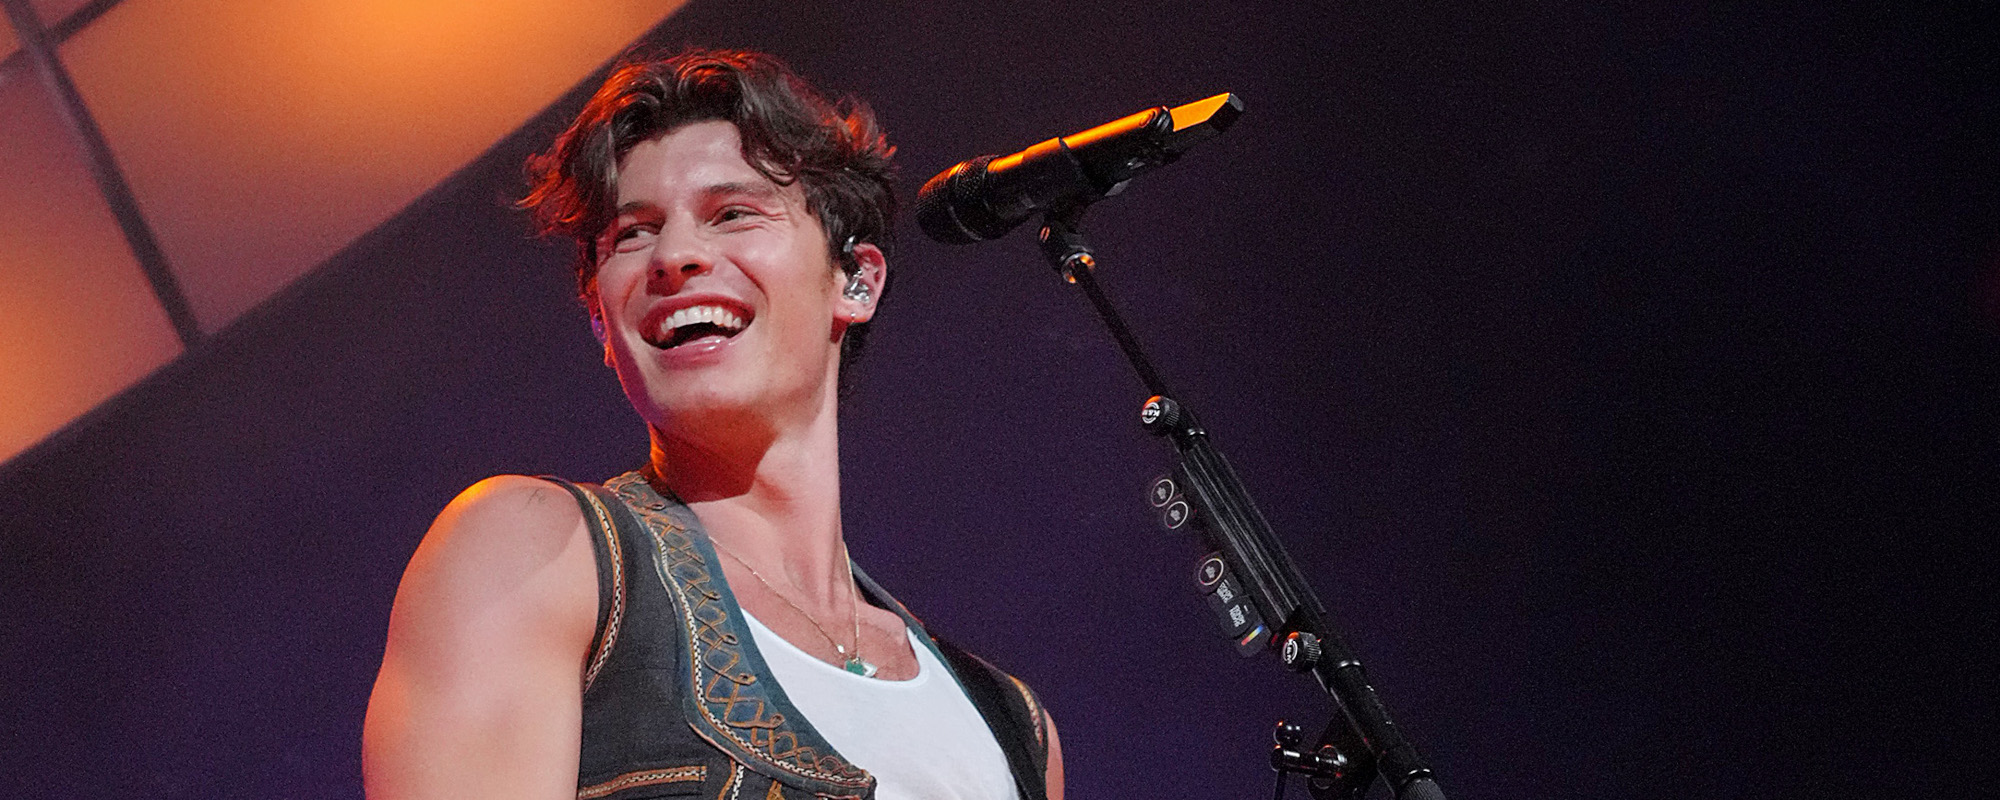 Shawn Mendes Postpones Tour to Take Care of Mental Health—“I’ve Hit a Breaking Point”